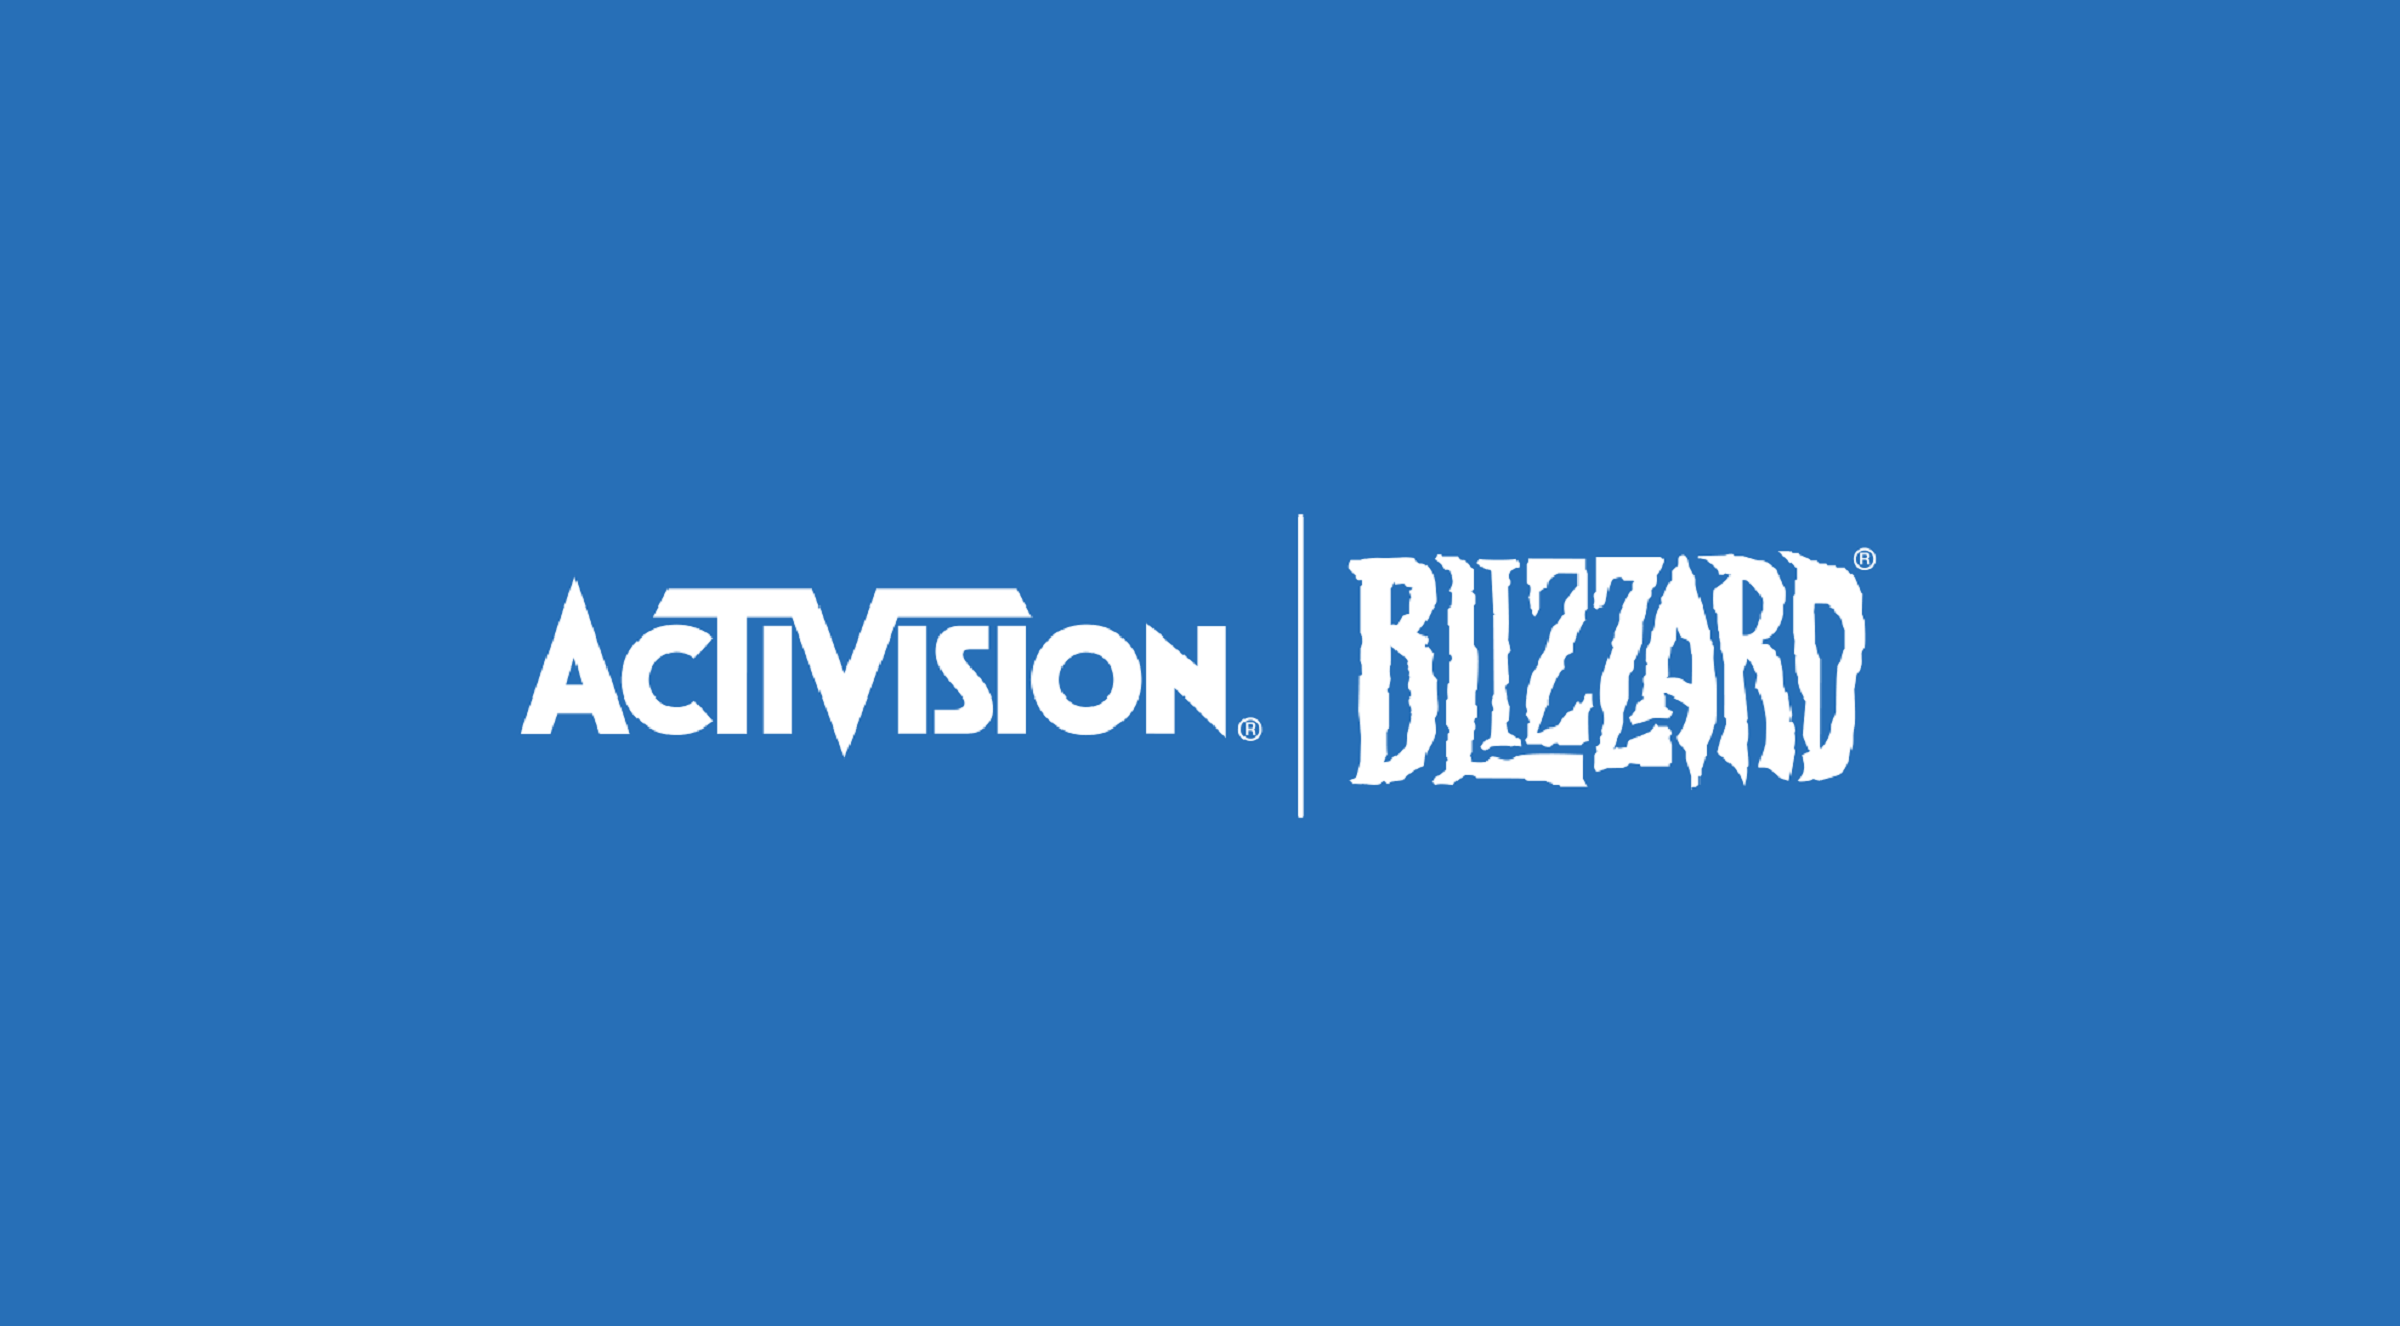 Image for Activision, Blizzard mandate partial return to office